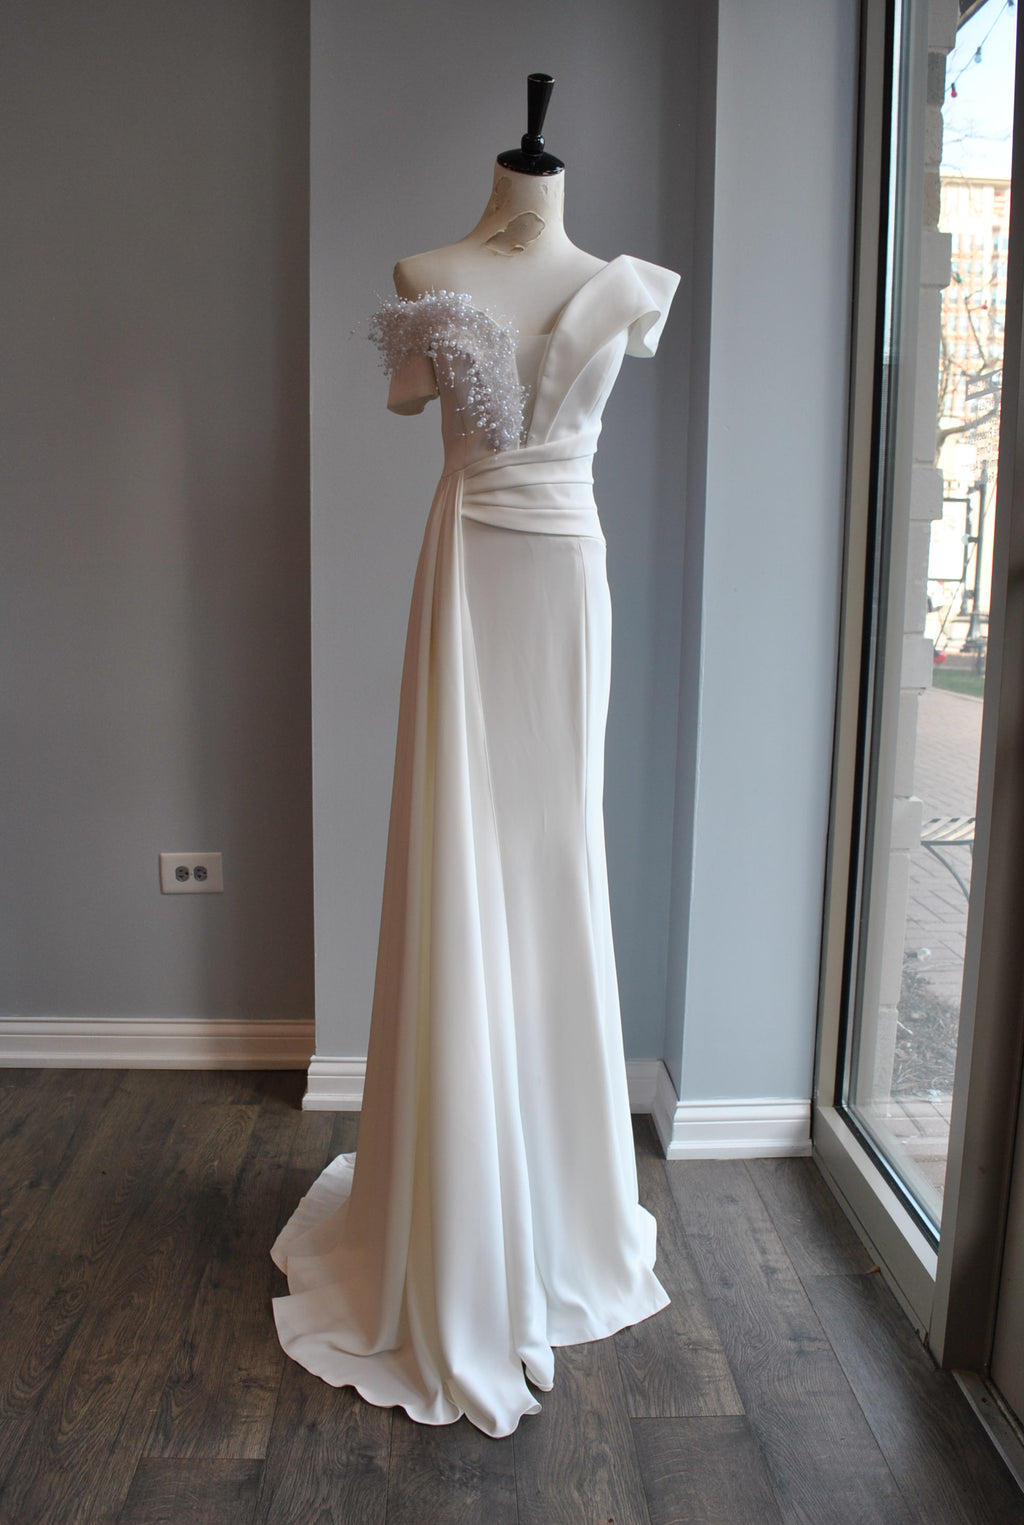 WHITE LONG SYMMETRIC EVENING GOWN WITH PEARLS